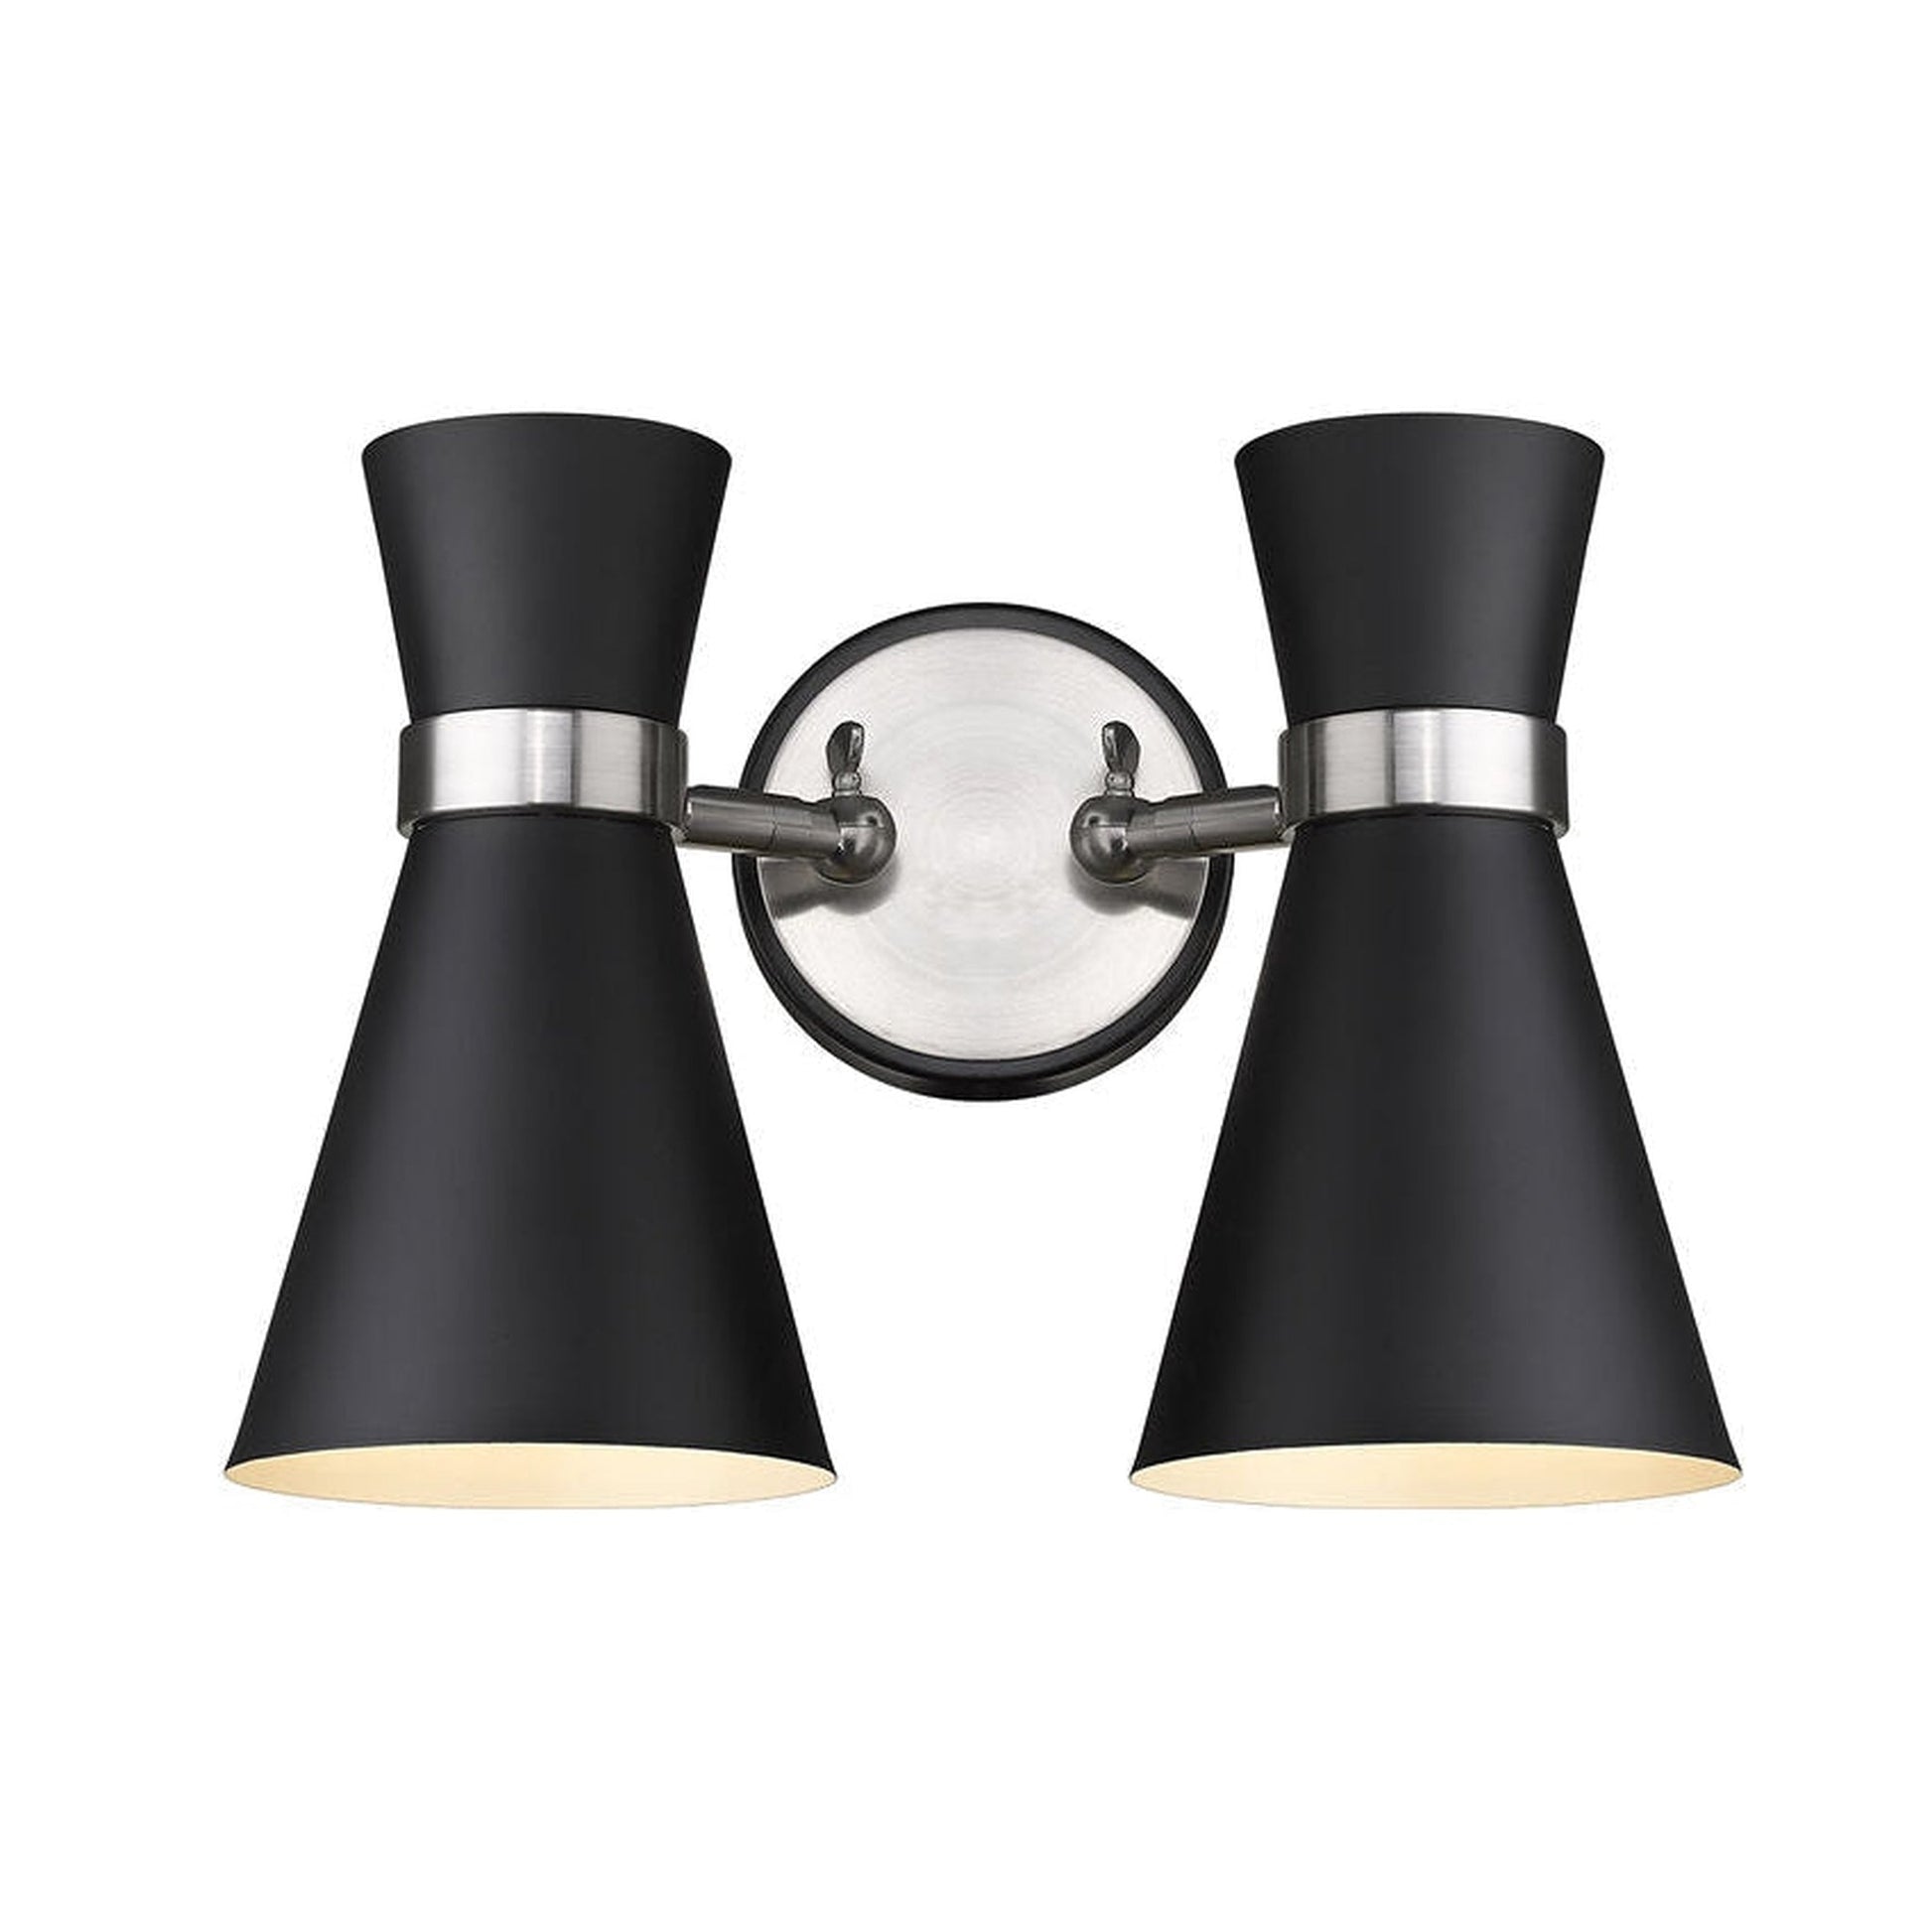 Z-Lite Soriano 12" 2-Light Matte Black and Brushed Nickel Wall Sconce With Matte Black Metal Shade